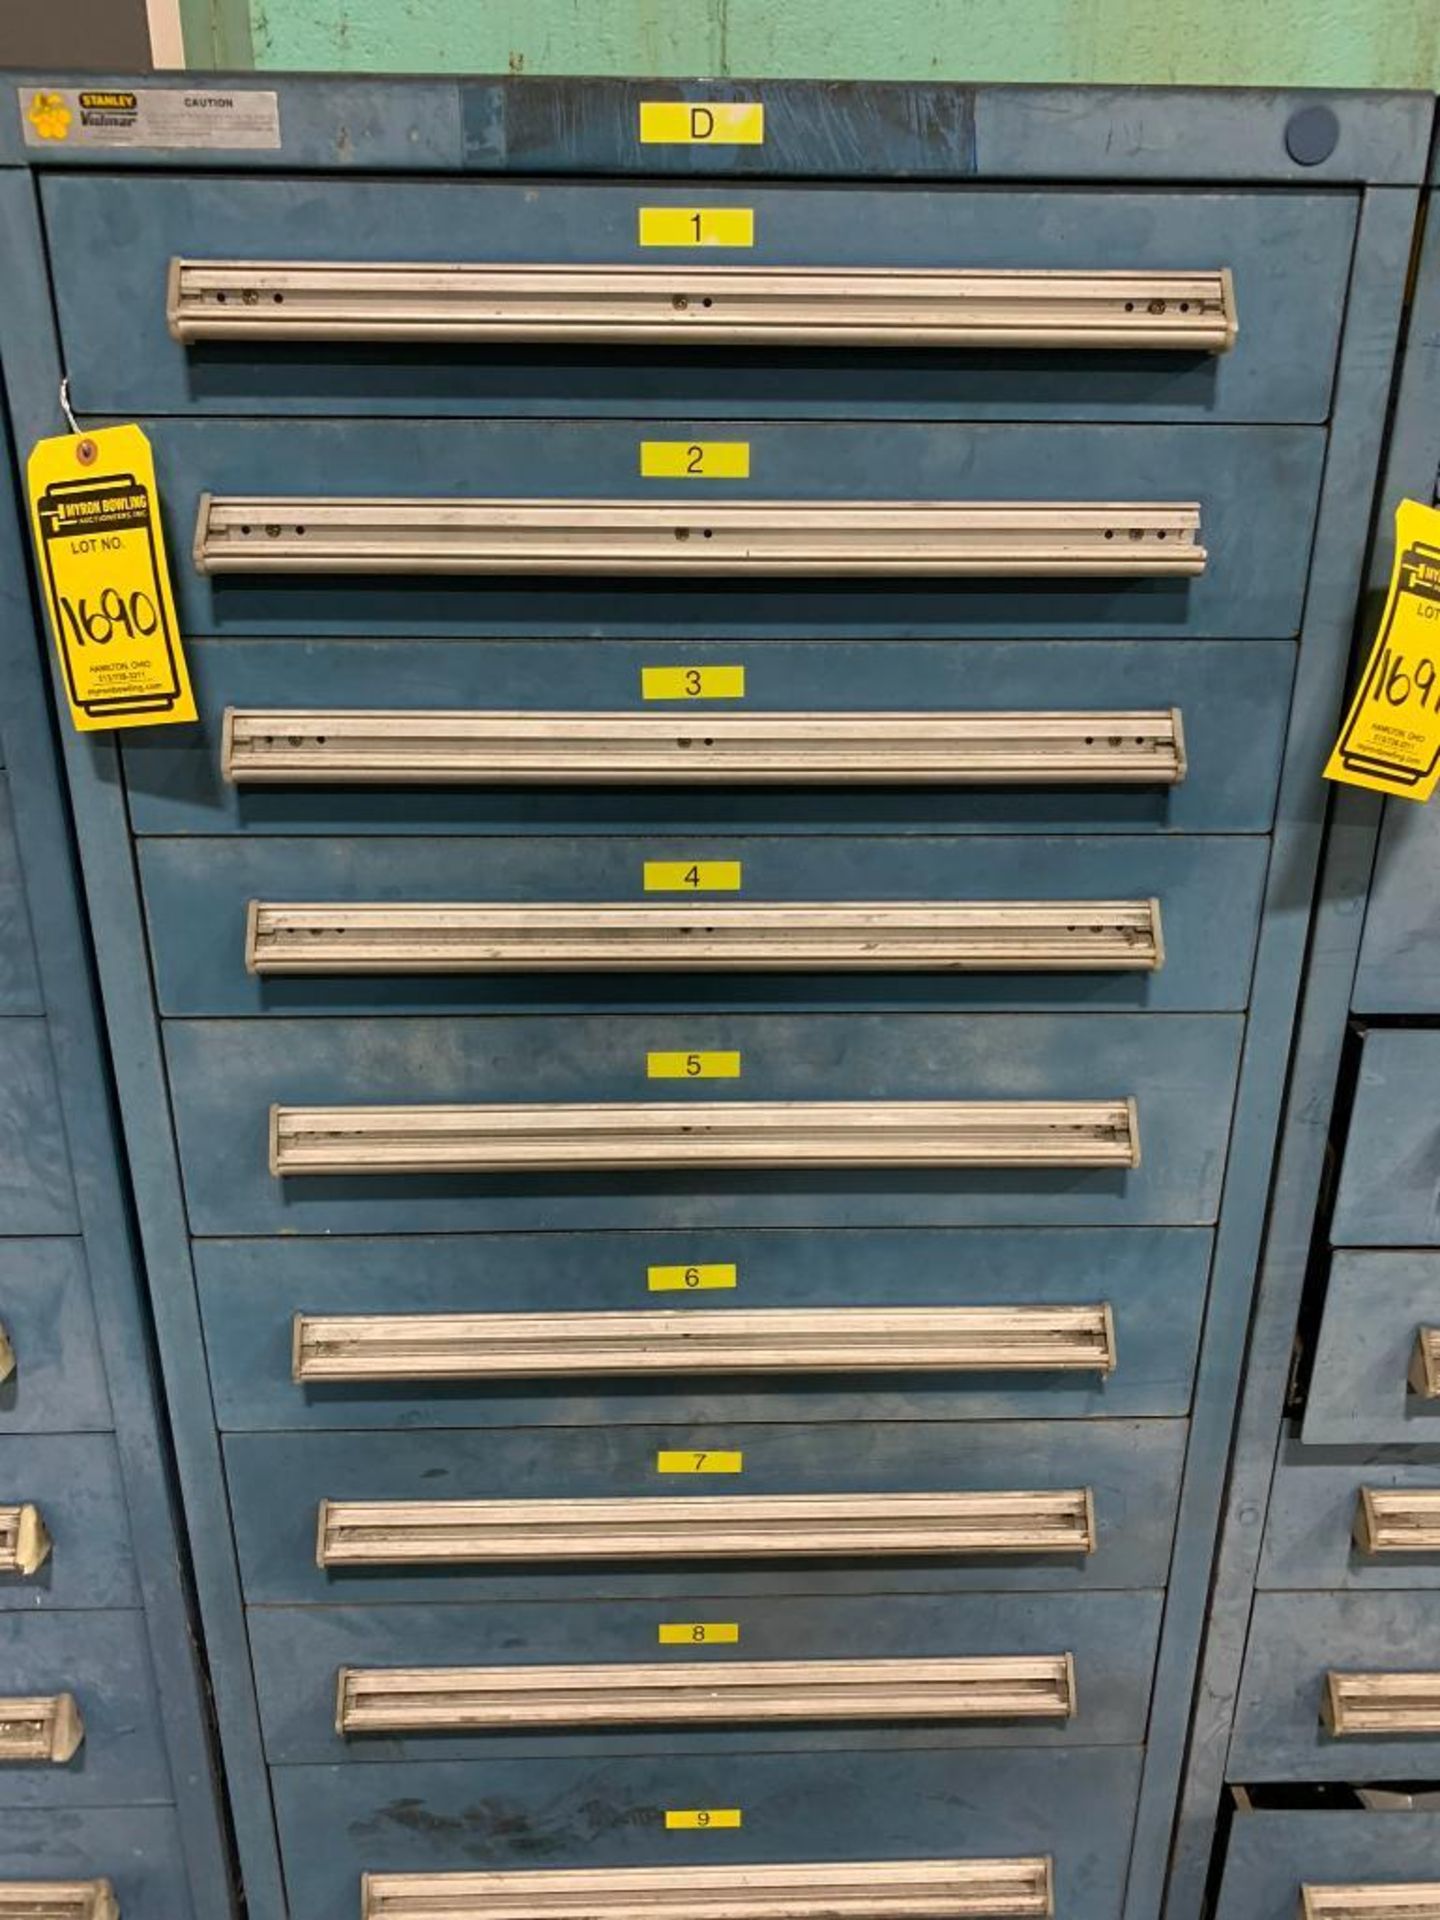 Stanley Vidmar 9-Drawer Cabinet w/ Transformers, Circuit Breakers, Relays, Assorted Switches, Indica